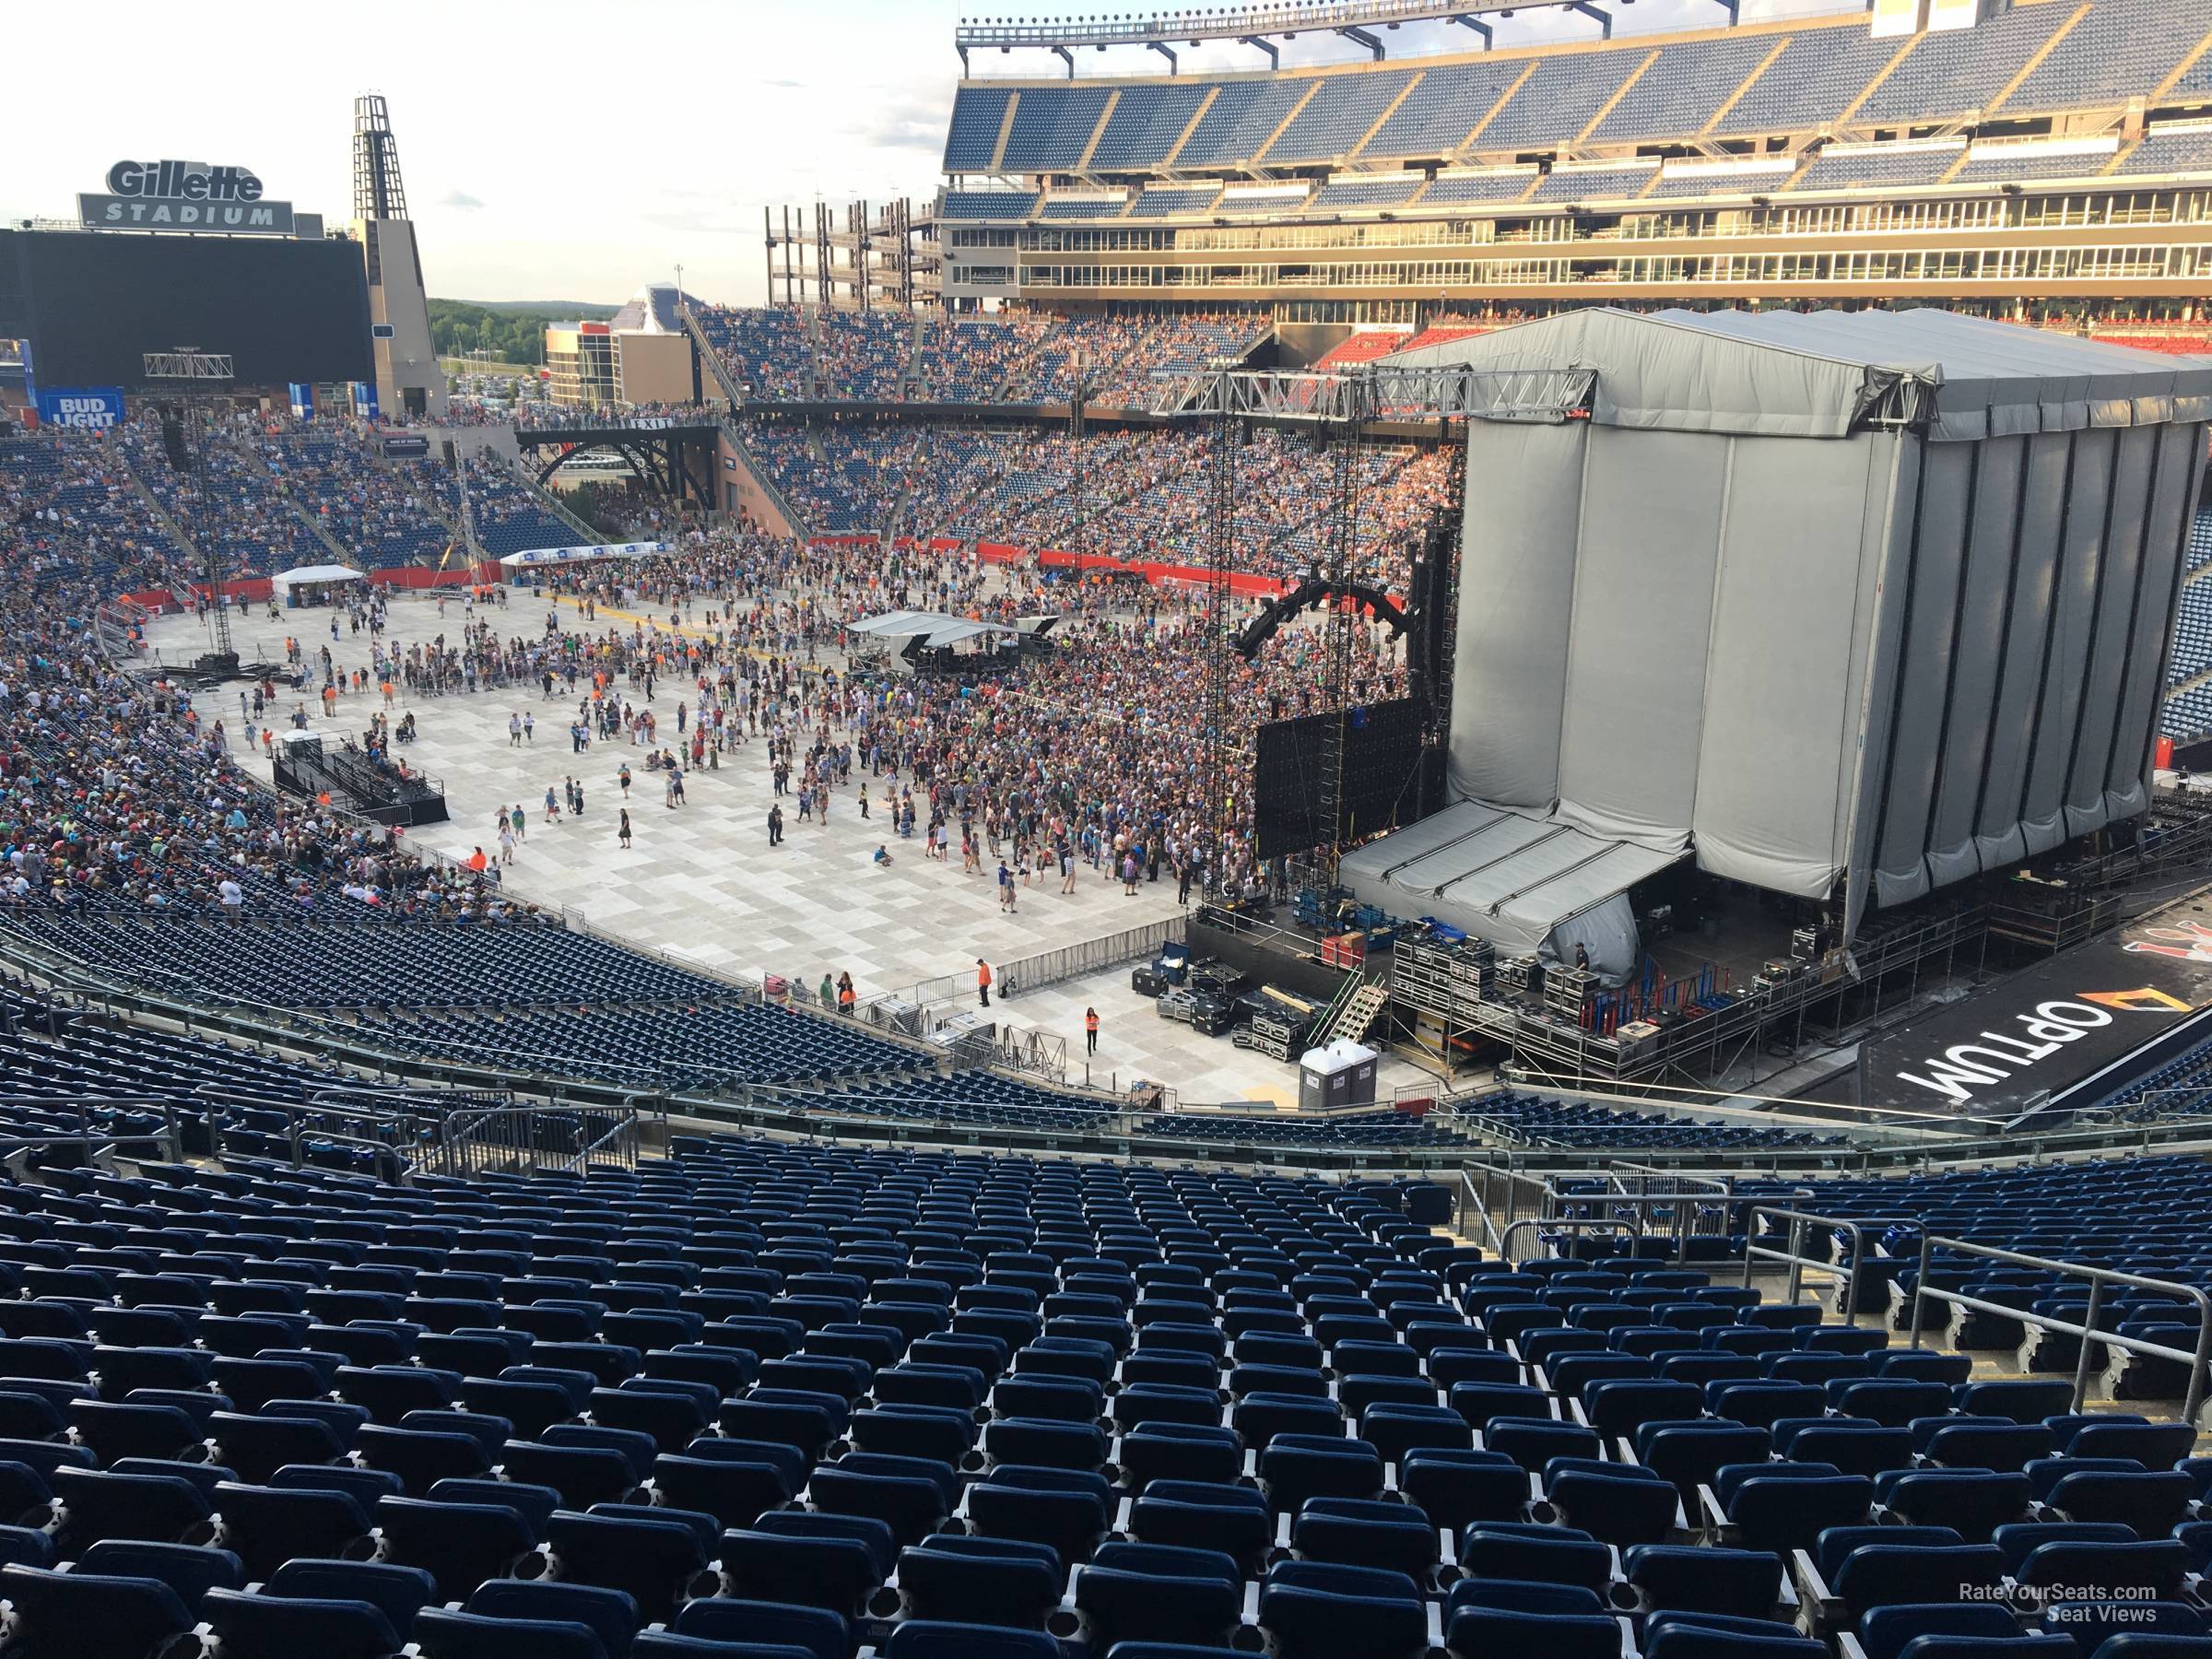 Gillette Stadium Seating Chart Taylor Swift Review Home Decor